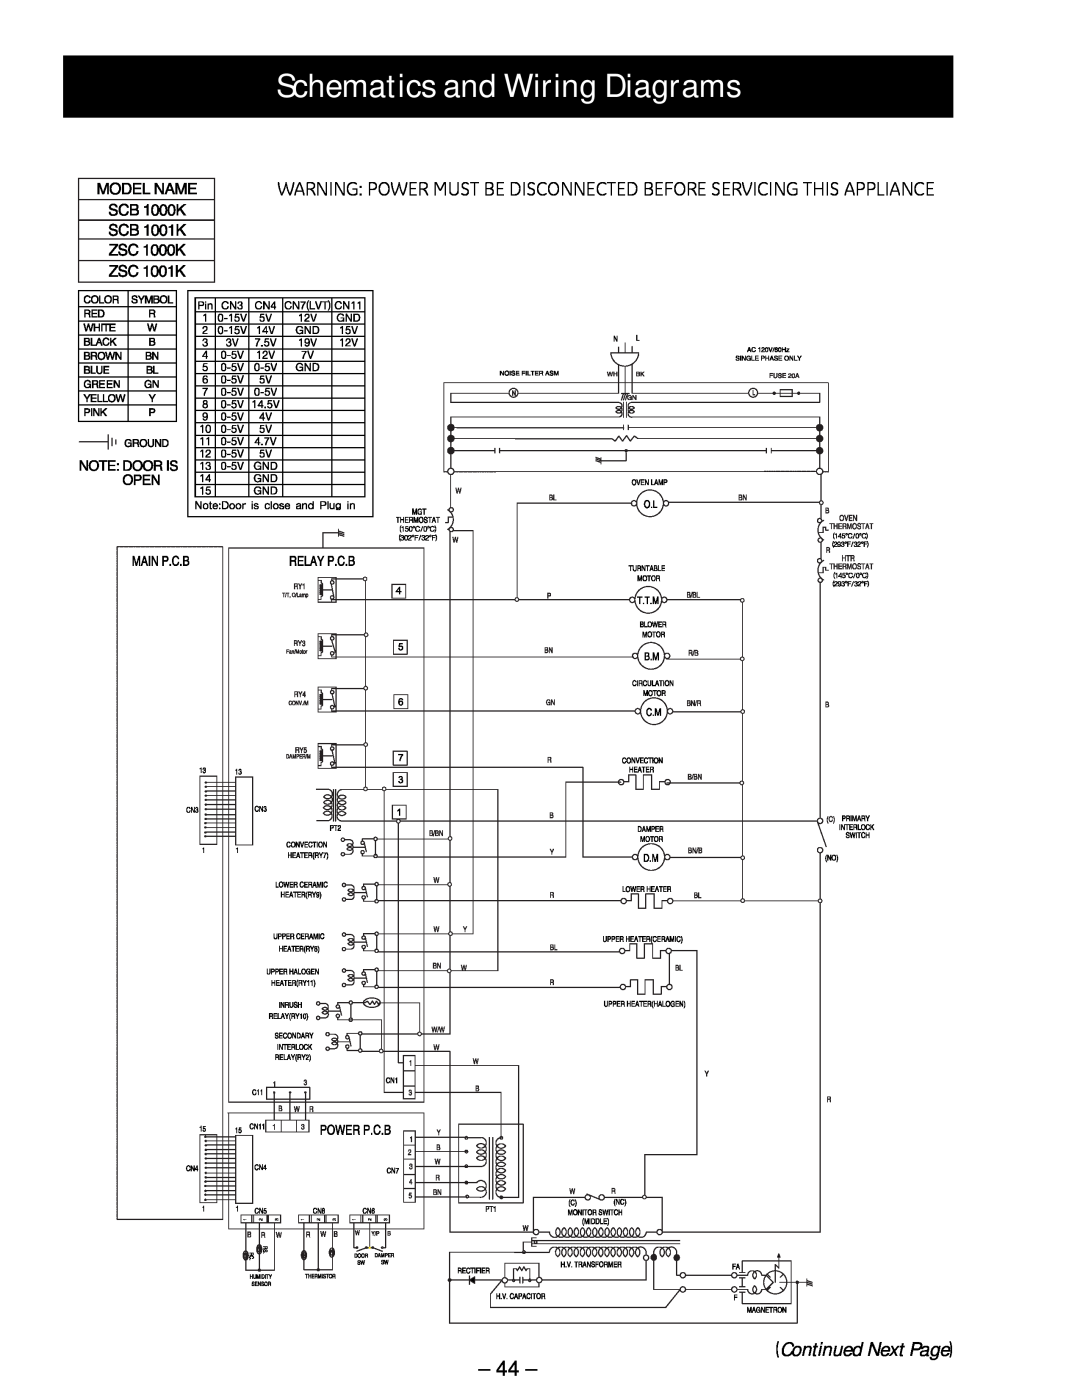 GE ZSC 1001, ZSC 1000 Schematics and Wiring Diagrams, Warning Power Must Be Disconnected Before Servicing This Appliance 